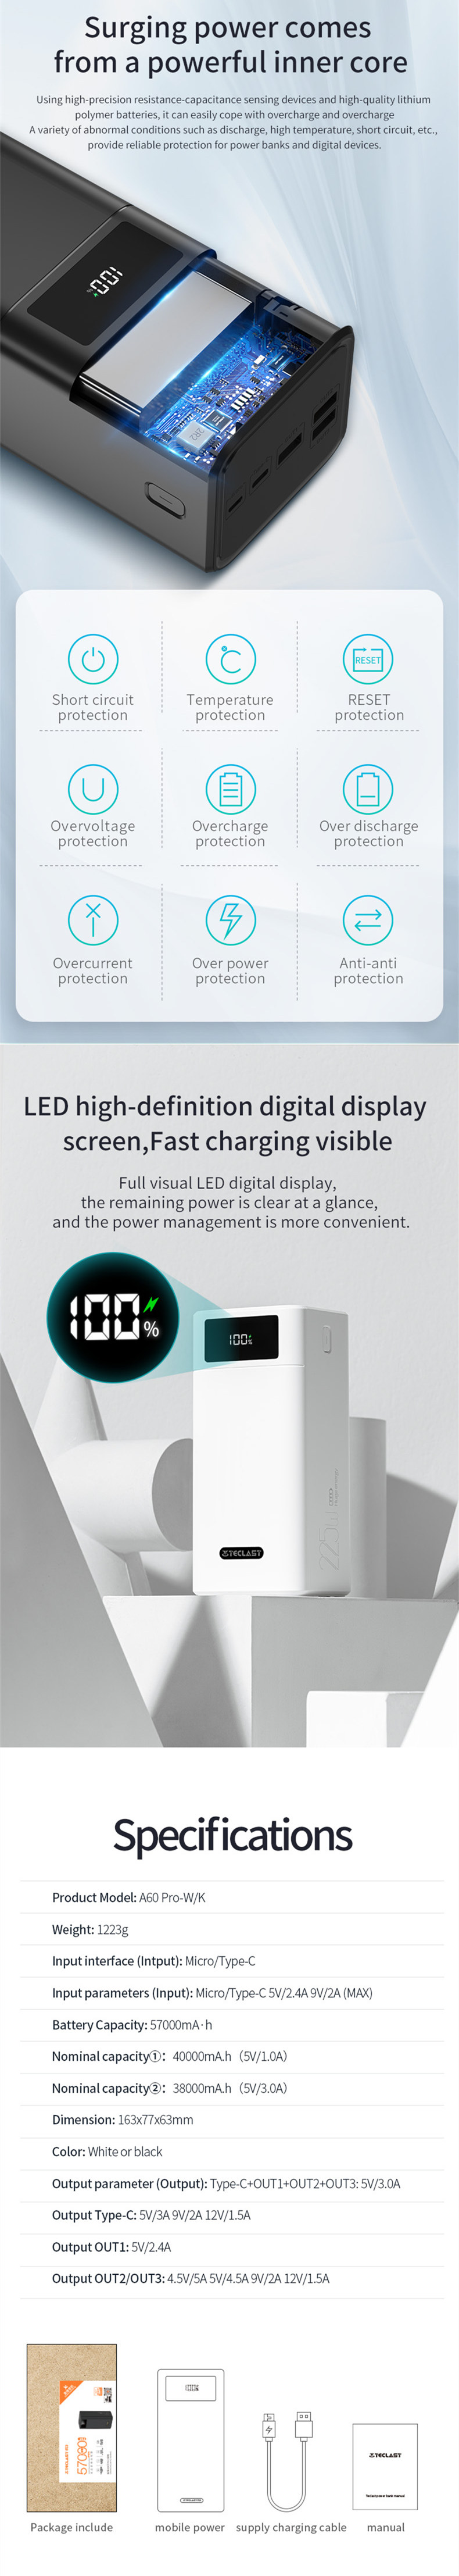 Teclast A60 Pro 22.5W 57000mAh Power Bank PD QC3.0 SCP FCP AFC Fast Charging 2 Input & 4 Output LED Display External Power Supply for iPhone 12 Pro Max for Samsung Galaxy Note S20 Ultra Huawei Mate 40 OnePlus 8 Pro